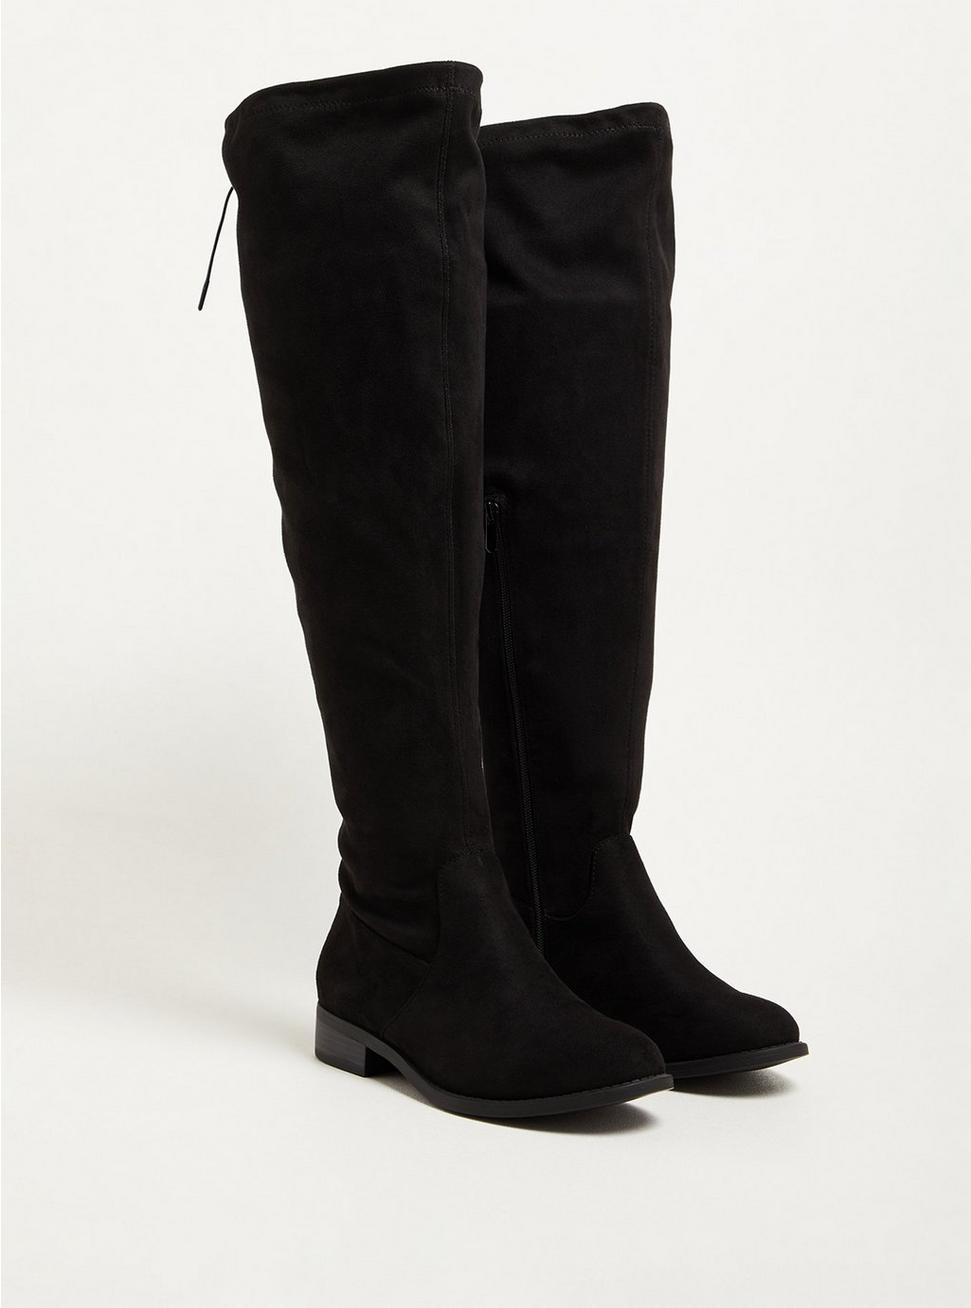 Plus Size Stretch Flat Over The Knee Boot (WW), BLACK, hi-res